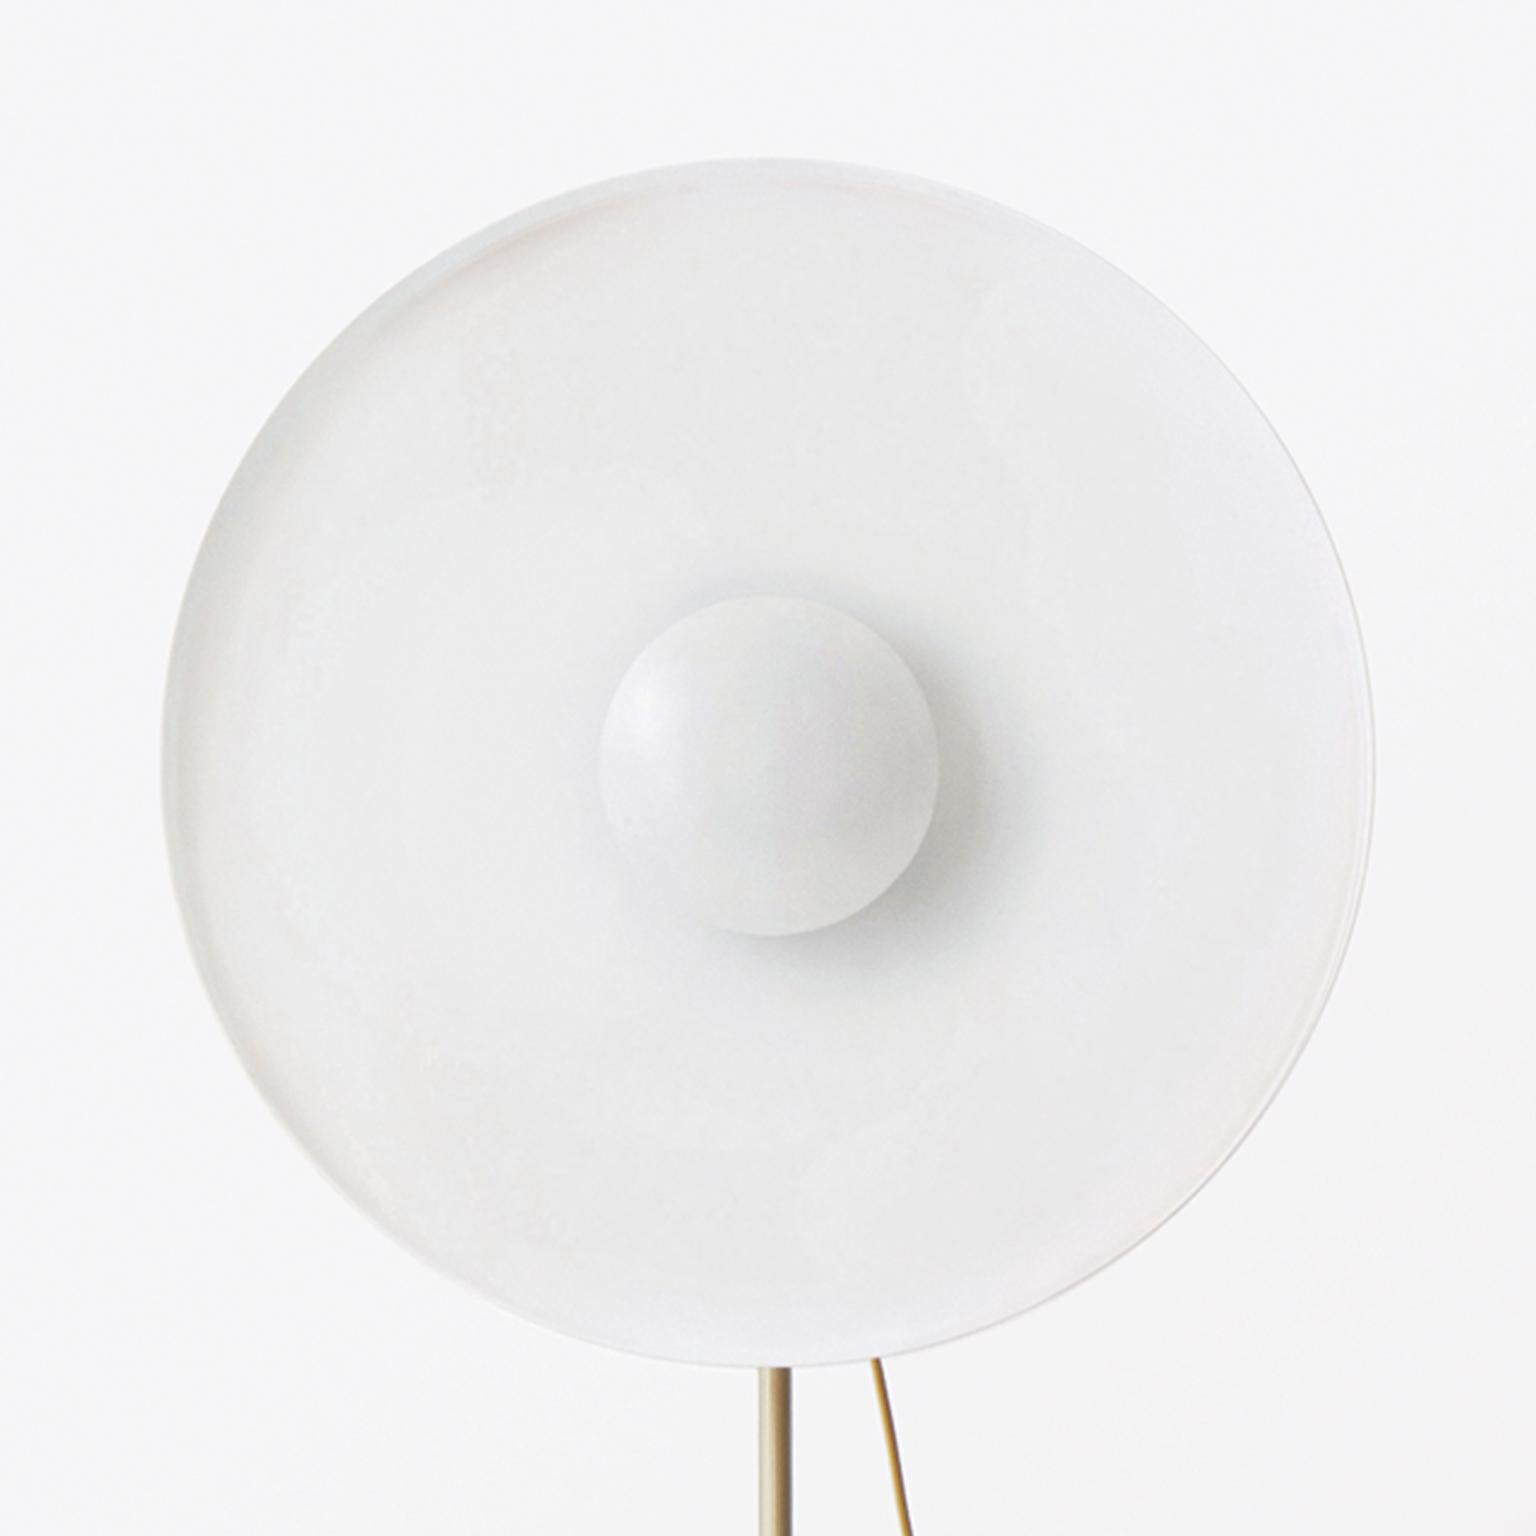 Brass Parabola Copper Floor Lamp and White Disk, Atelier Biagetti